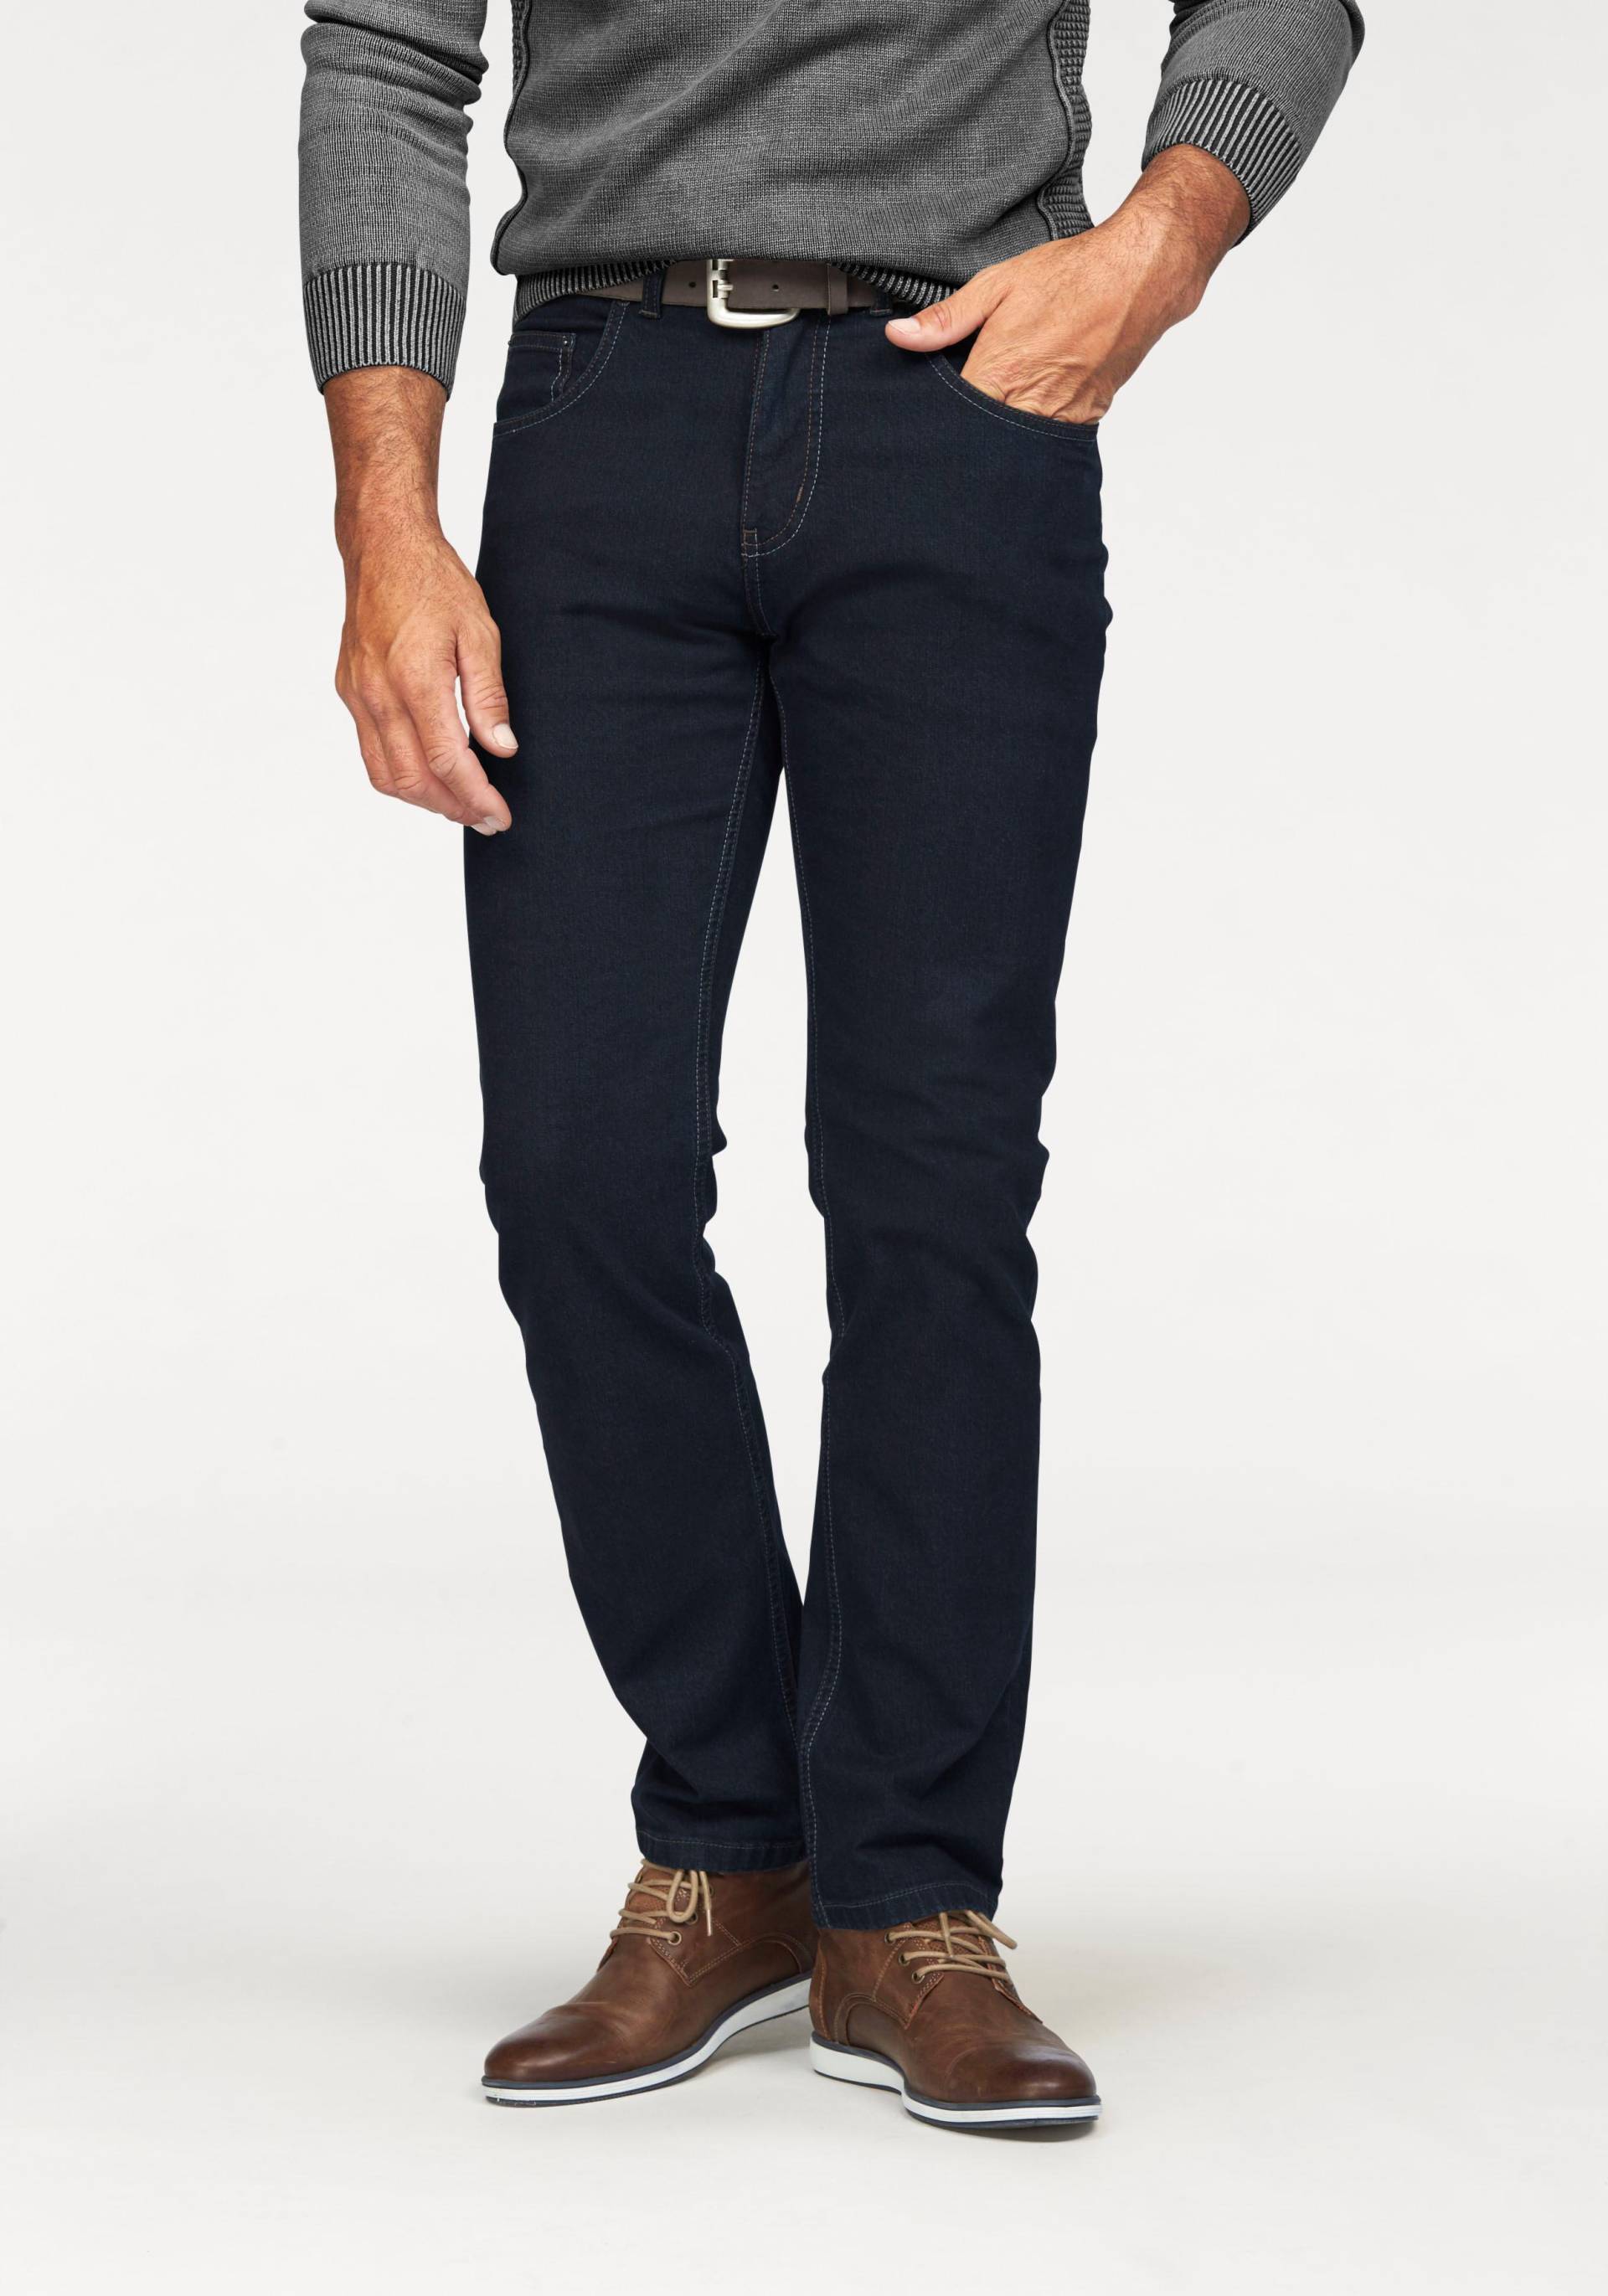 Pioneer Authentic Jeans Stretch-Jeans »Ron«, Straight Fit von Pioneer Authentic Jeans